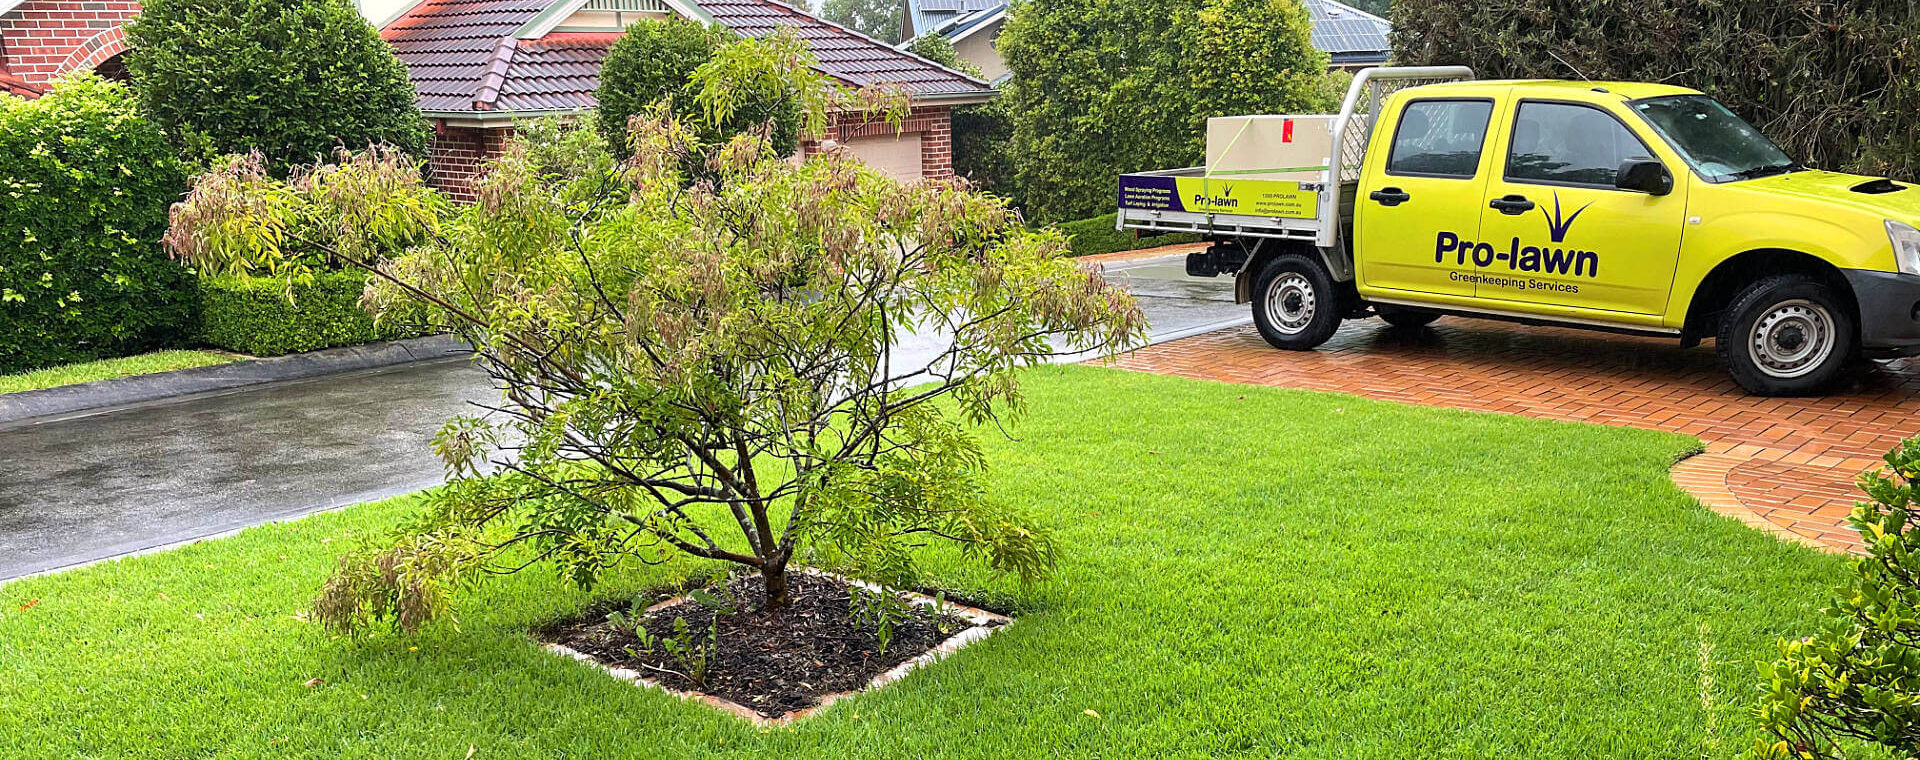 Lawn Care Professionals in <span>the Lane Cove District</span>